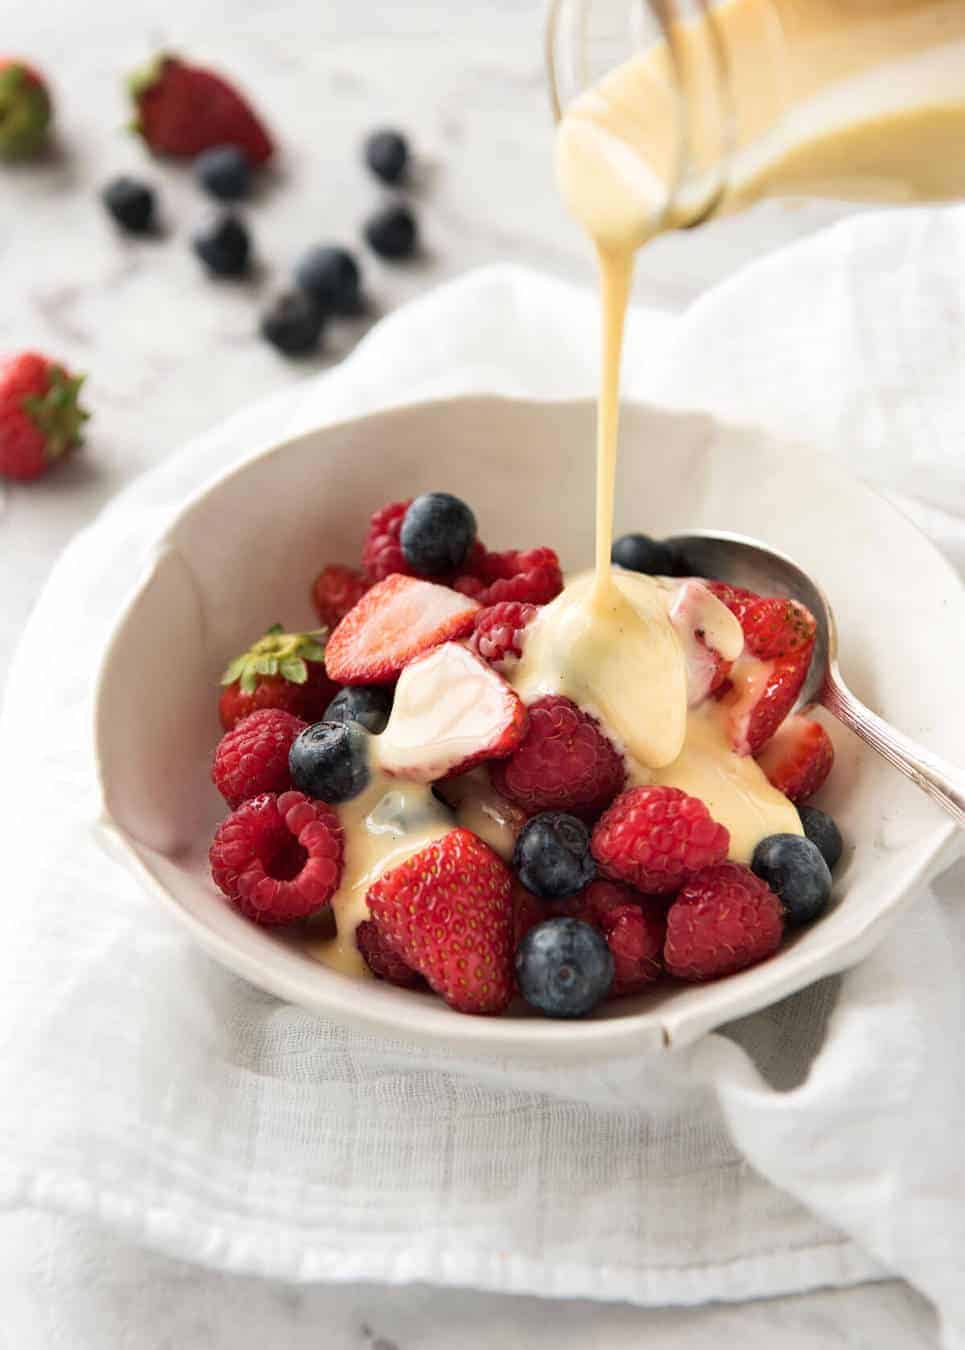 A classic, easy custard made using only egg as the thickener, no cornflour. Also known as Creme Anglaise, this is rich and stunning! www.recipetineats.com